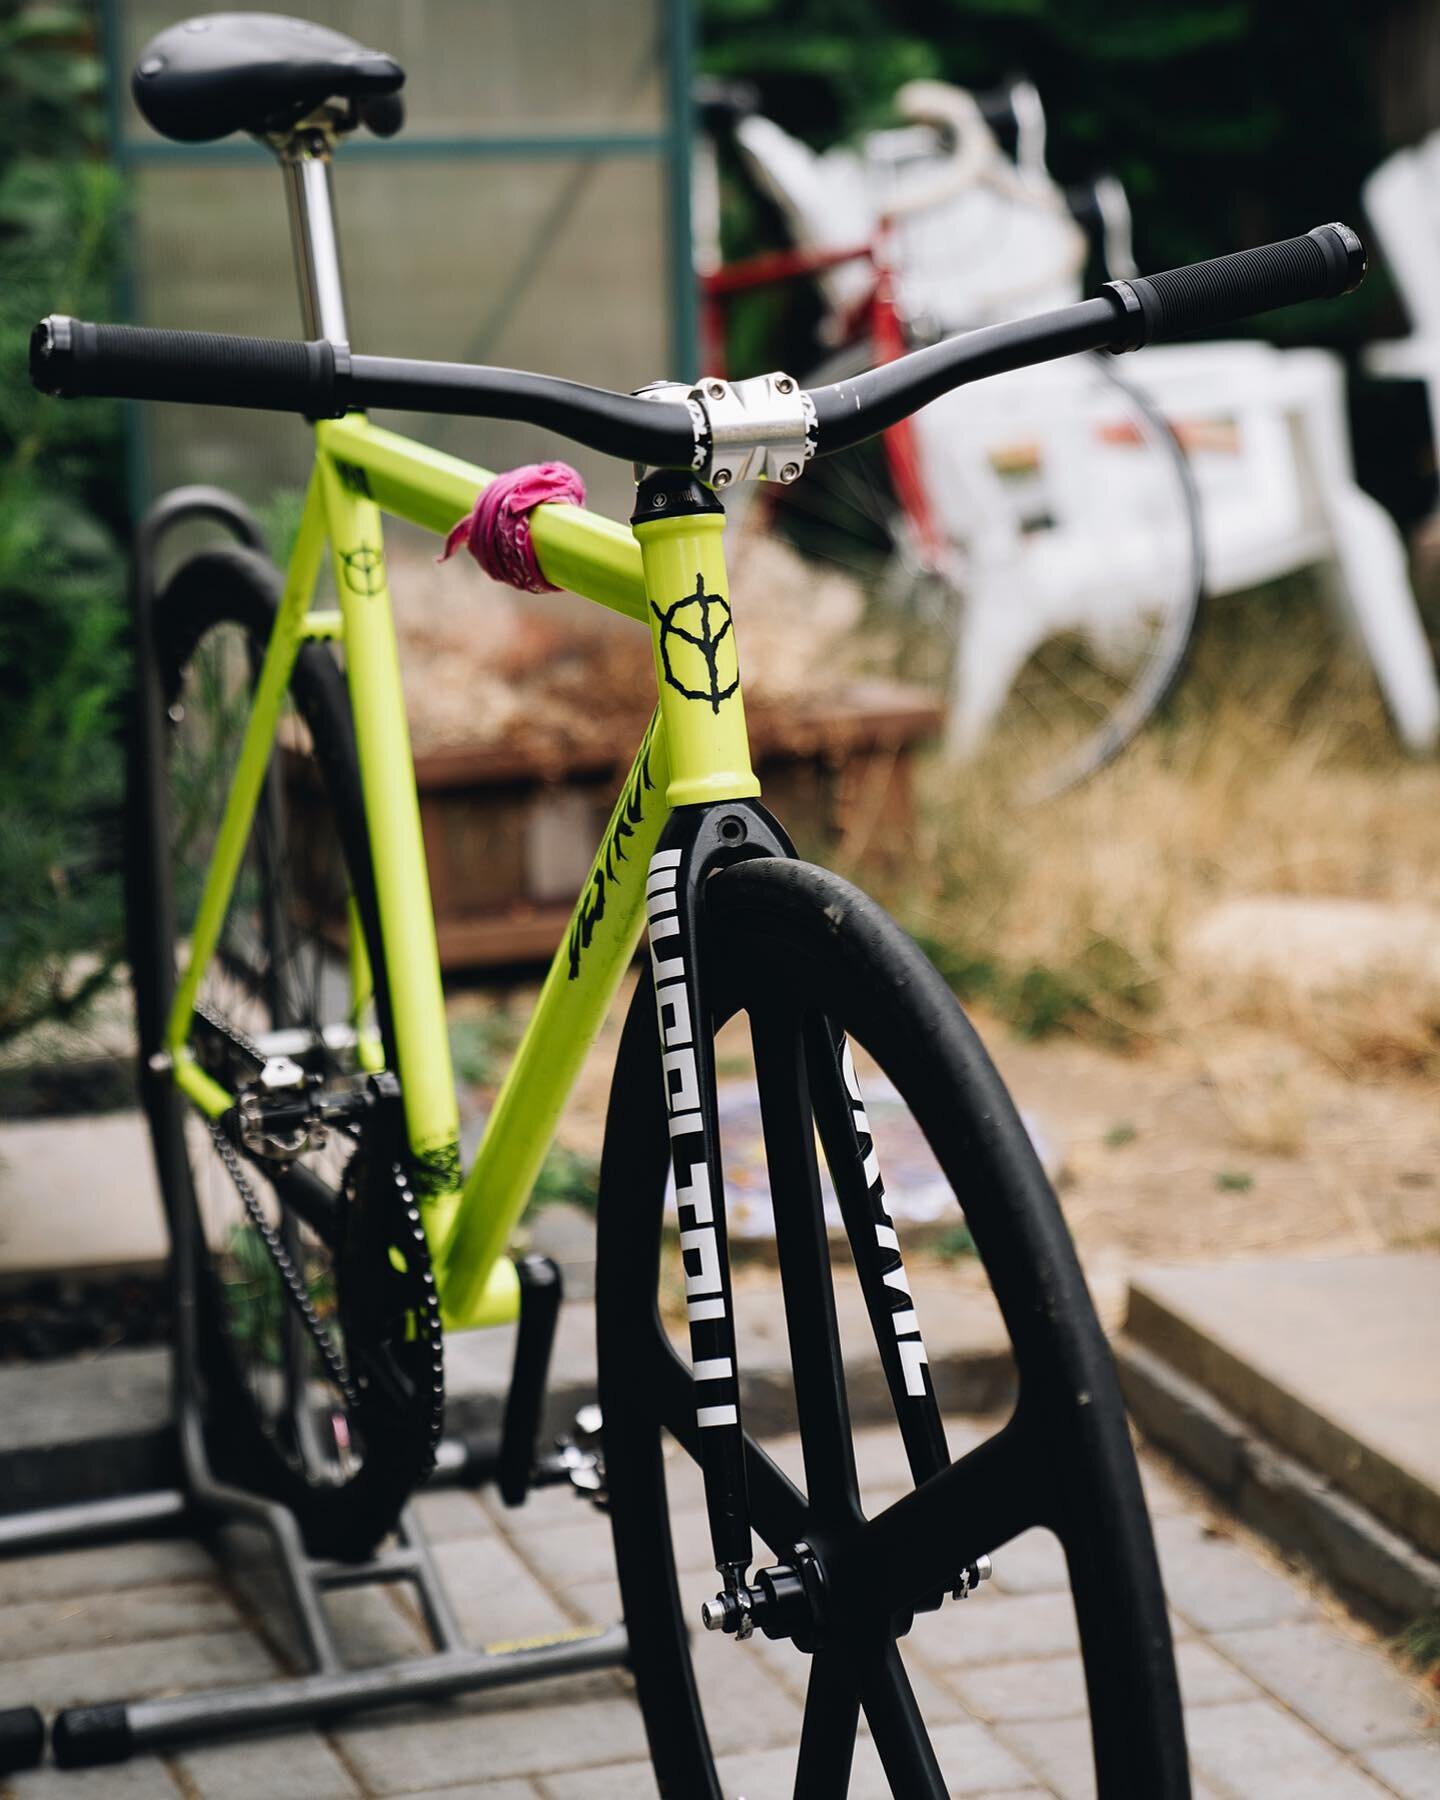 DESTROY. Custom Track.
.
Track prototype from the catacombs. Attached to @coven0fskum 
.
Chat with us about building YOUR custom DESTROY
or check out our current inventory 
here👇

WWW.DESTROYBIKECO.COM
.
PDX BUILT//AMERICAN MADE
.
#americanmade #han